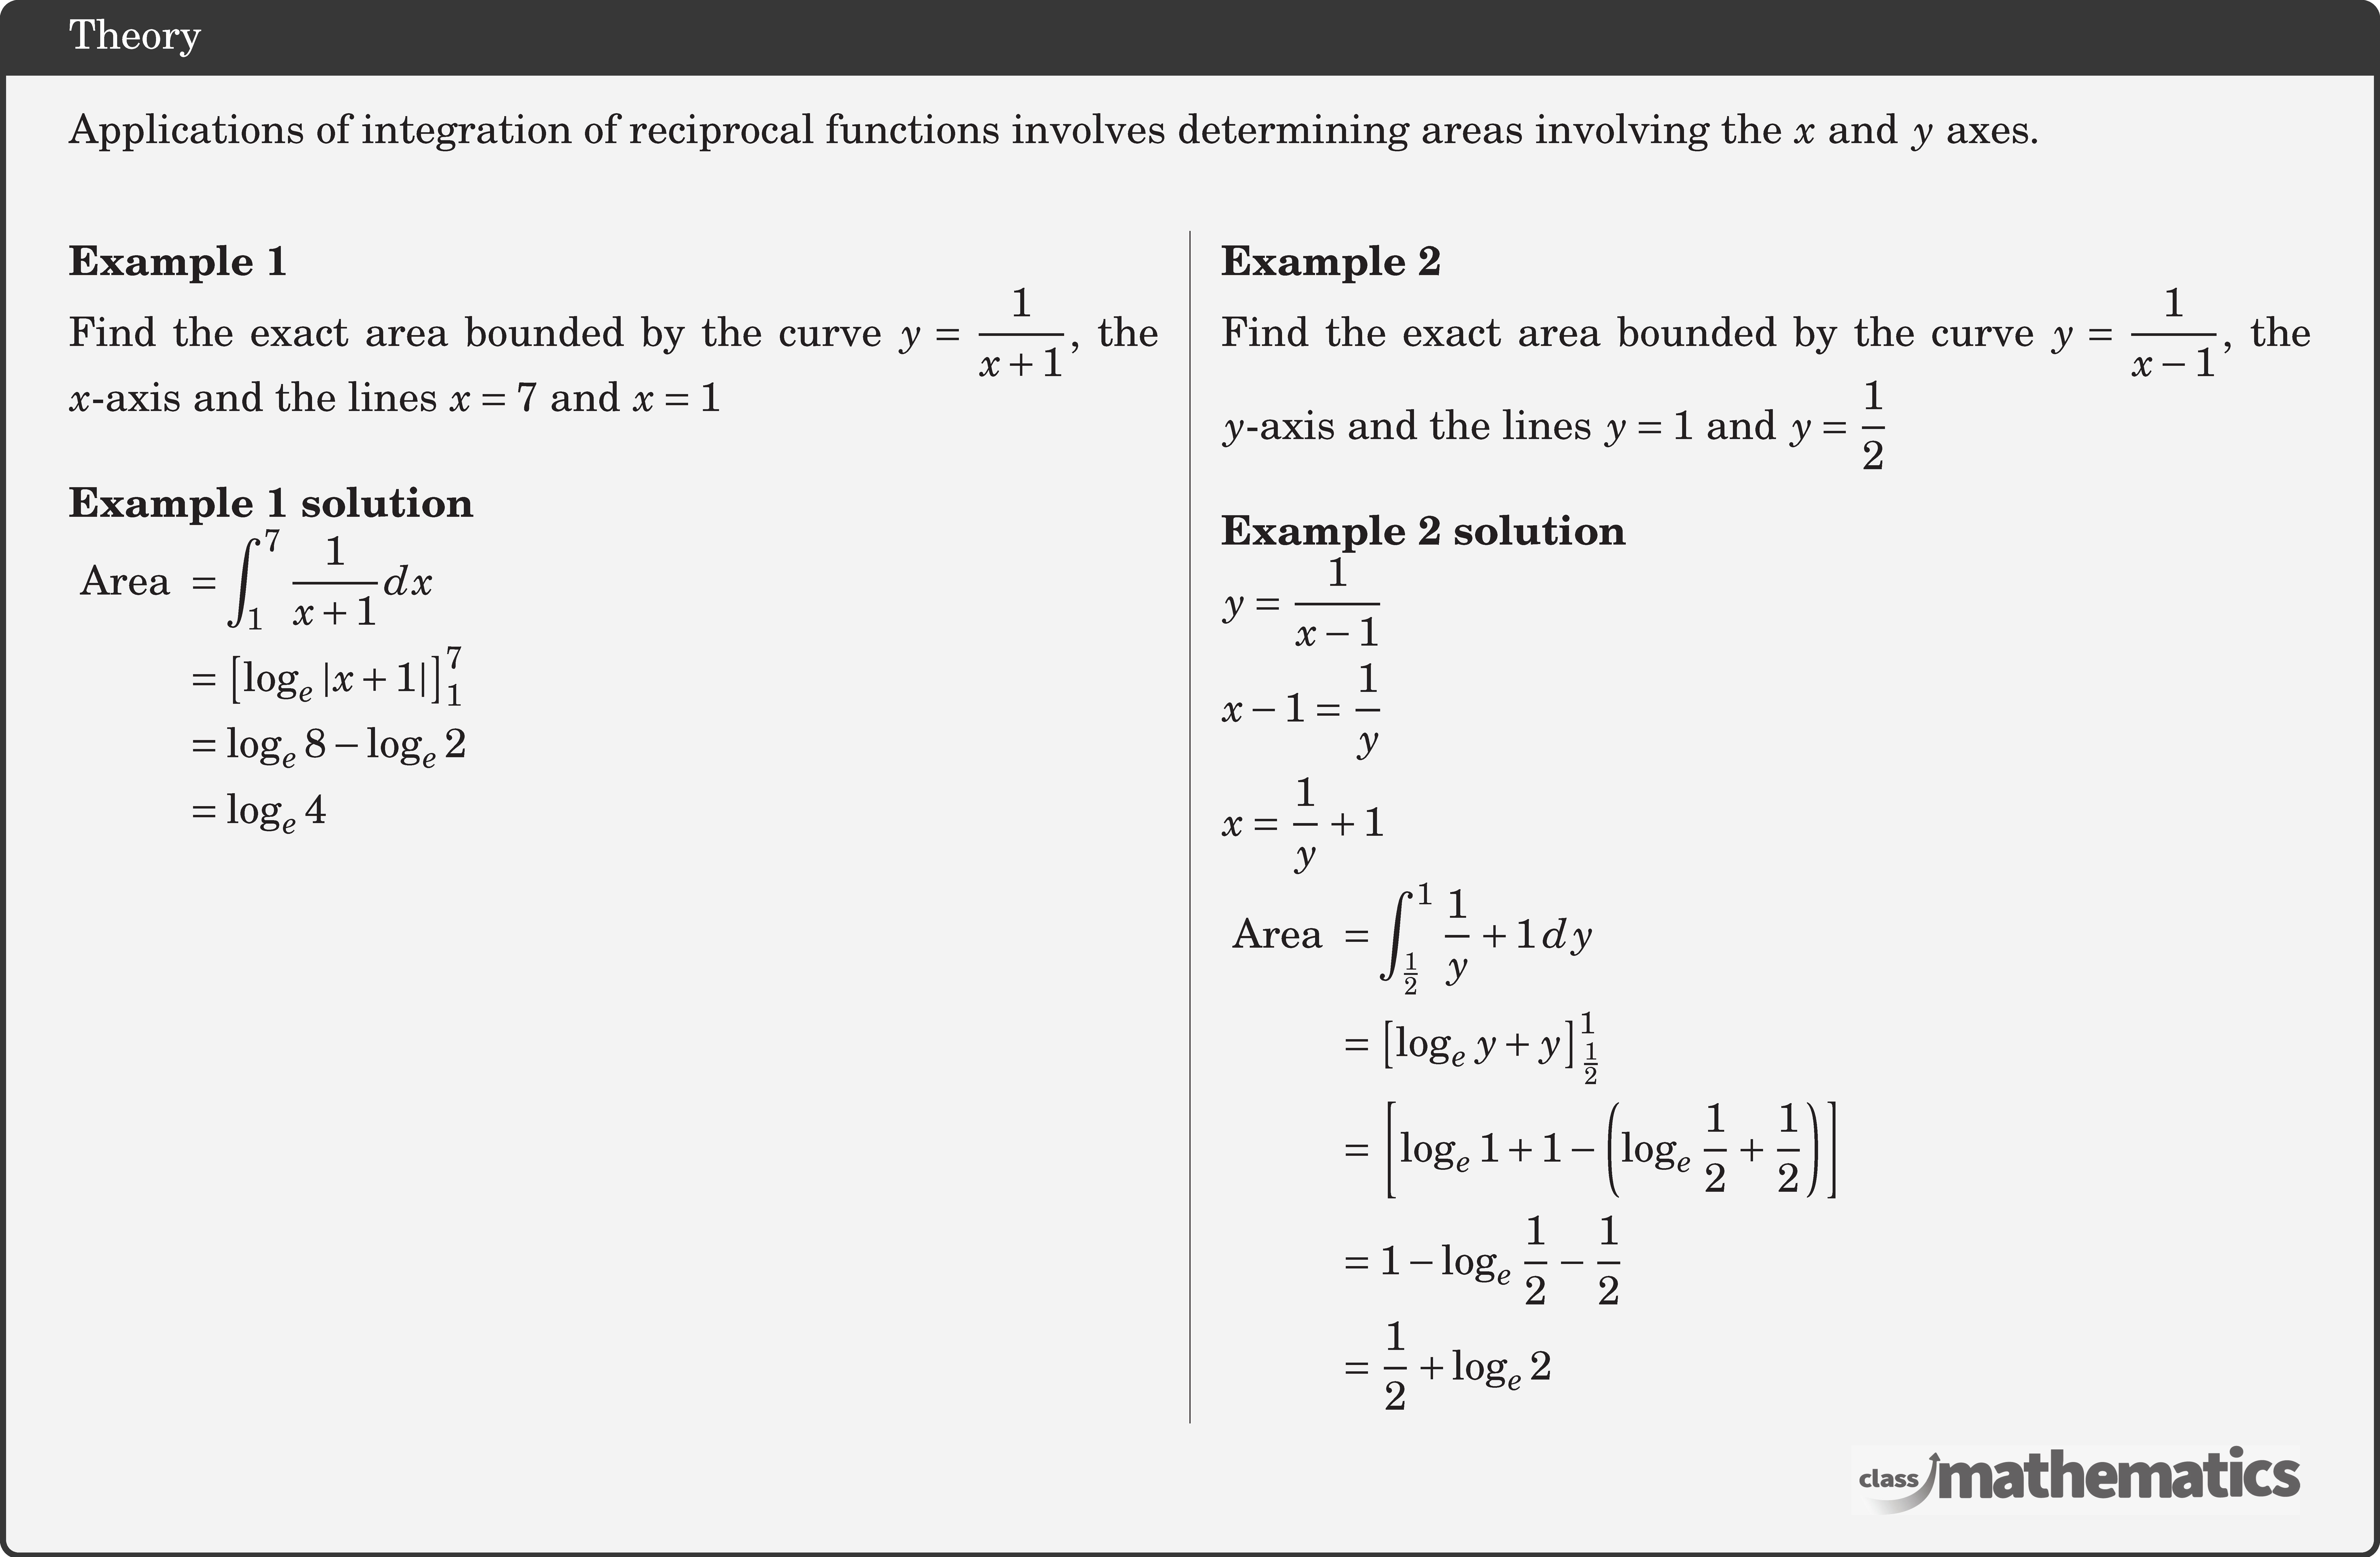 Applications of integration of reciprocal functions involves determining areas involving the \(x\) and \(y\) axes.\\  \begin{multicols}{2}  \textbf{Example 1}\\ Find the exact area bounded by the curve \(y=\dfrac{1}{x+1}\), the \(x\)-axis and the lines \(x=7\) and \(x=1\)\\  \textbf{Example 1 solution}\\ $\begin{aligned} \text { Area } & =\displaystyle \int_1^7 \frac{1}{x+1} d x \\ & =\left[\log _e|x+1|\right]_1^7 \\ & =\log _e 8-\log _e 2 \\ & =\log _e 4 \end{aligned}$\\  \columnbreak \textbf{Example 2}\\ Find the exact area bounded by the curve \(y=\dfrac{1}{x-1}\), the \(y\)-axis and the lines \(y=1\) and \(y=\dfrac{1}{2}\)\\  \textbf{Example 2 solution}\\ $\begin{aligned} & y=\frac{1}{x-1} \\ & x-1=\frac{1}{y} \\ & x=\frac{1}{y}+1 \end{aligned}$\\  $\begin{aligned} \text { Area } & =\displaystyle \int_{\frac{1}{2}}^1 \frac{1}{y}+1 \,d y \\ & =\left[\log _e y+y\right]_{\frac{1}{2}}^1 \\ & =\left[\log _e 1+1-\left(\log _e \frac{1}{2}+\frac{1}{2}\right)\right] \\ & =1-\log _e \frac{1}{2}-\frac{1}{2} \\ & =\frac{1}{2}+\log _e 2 \end{aligned}$\\  \end{multicols}